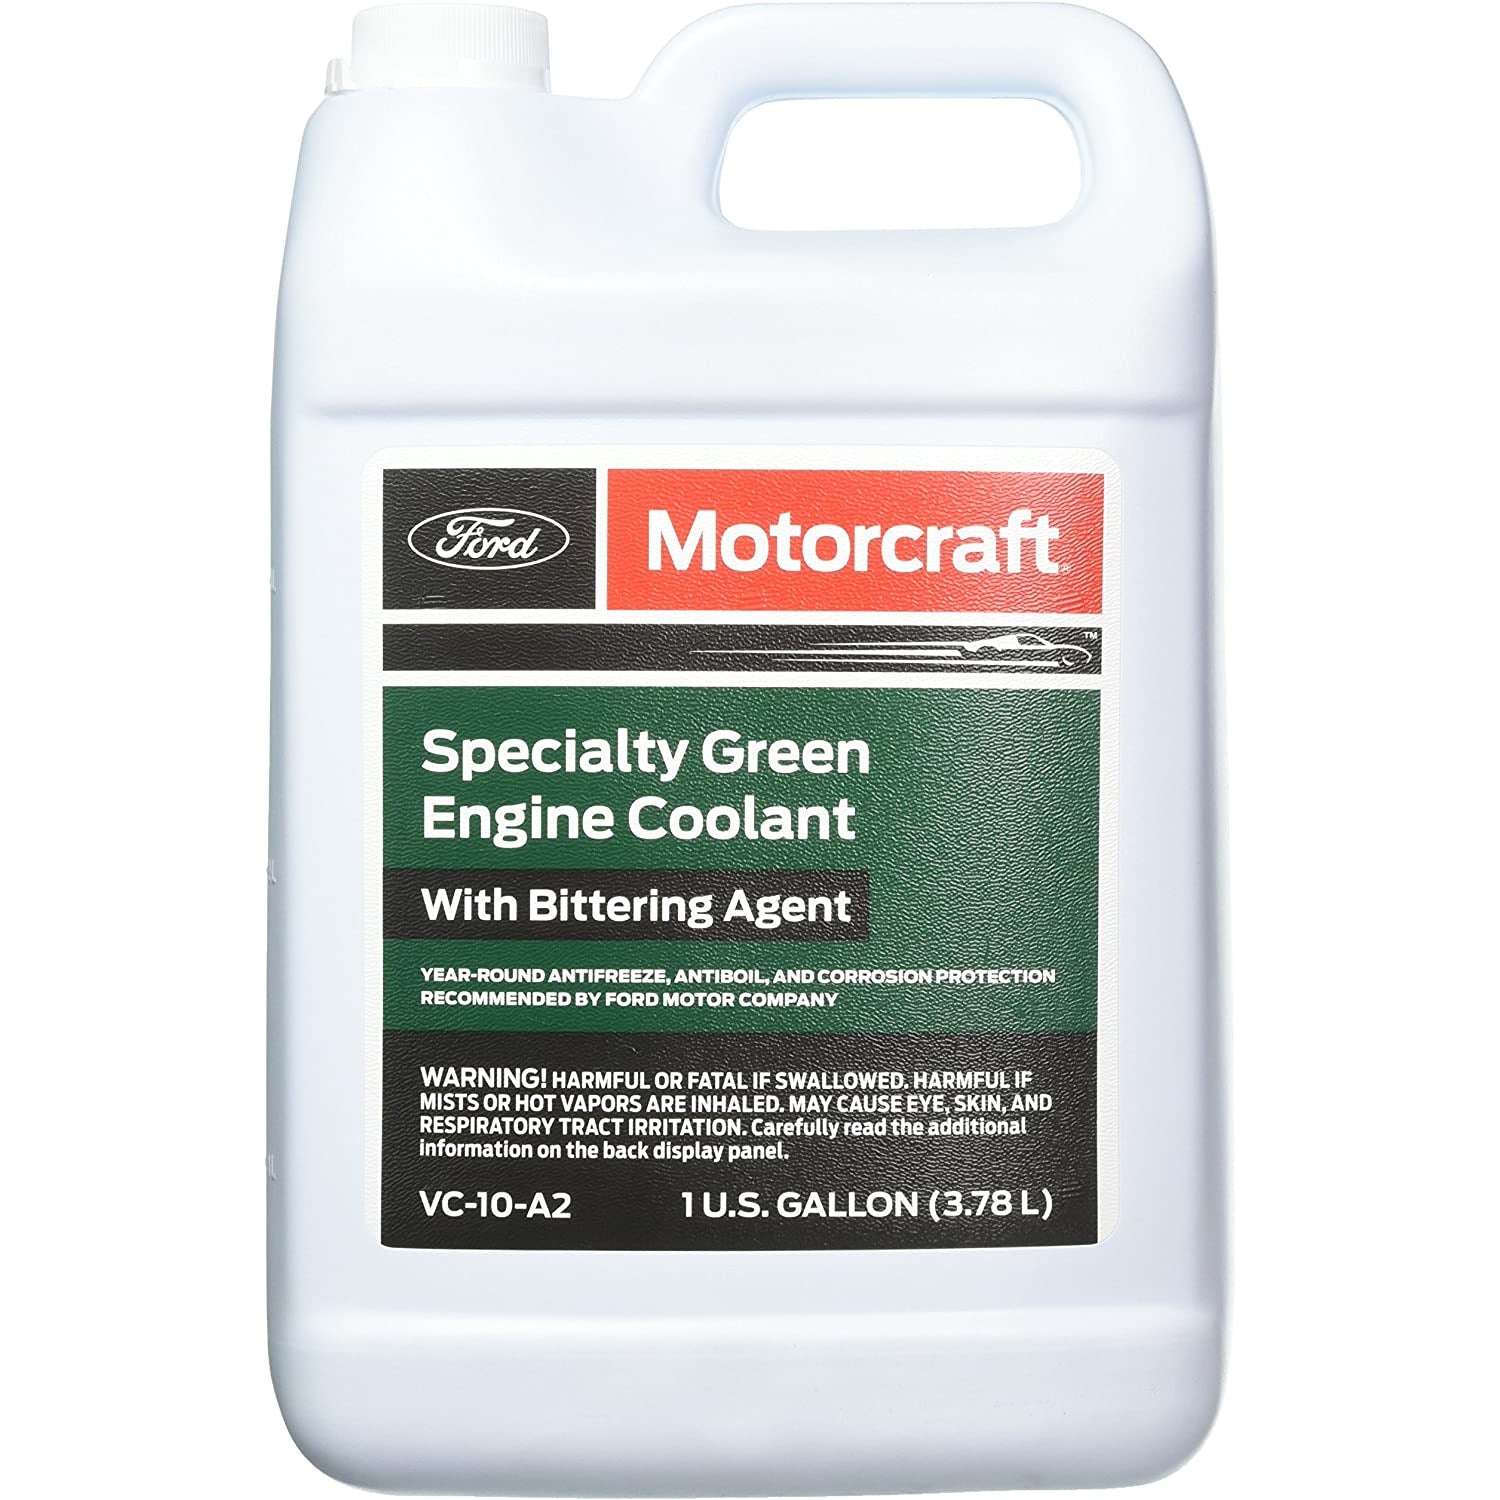 XFM VC10A2 Motorcraft Antifreeze/Coolant Concentrated w/ Bittering Agent (Specialty Green, 1 Gal)